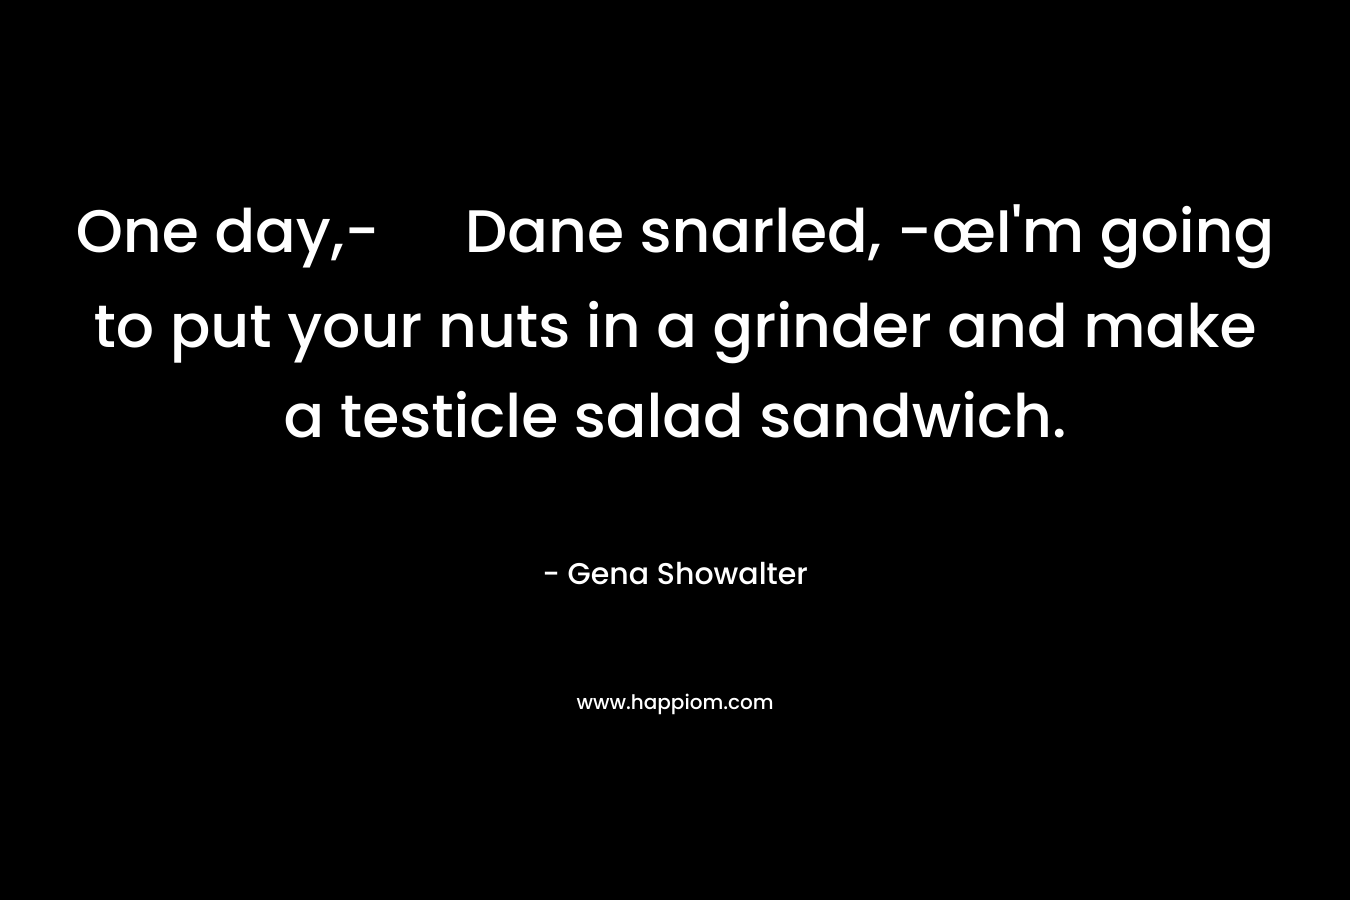 One day,- Dane snarled, -œI'm going to put your nuts in a grinder and make a testicle salad sandwich.